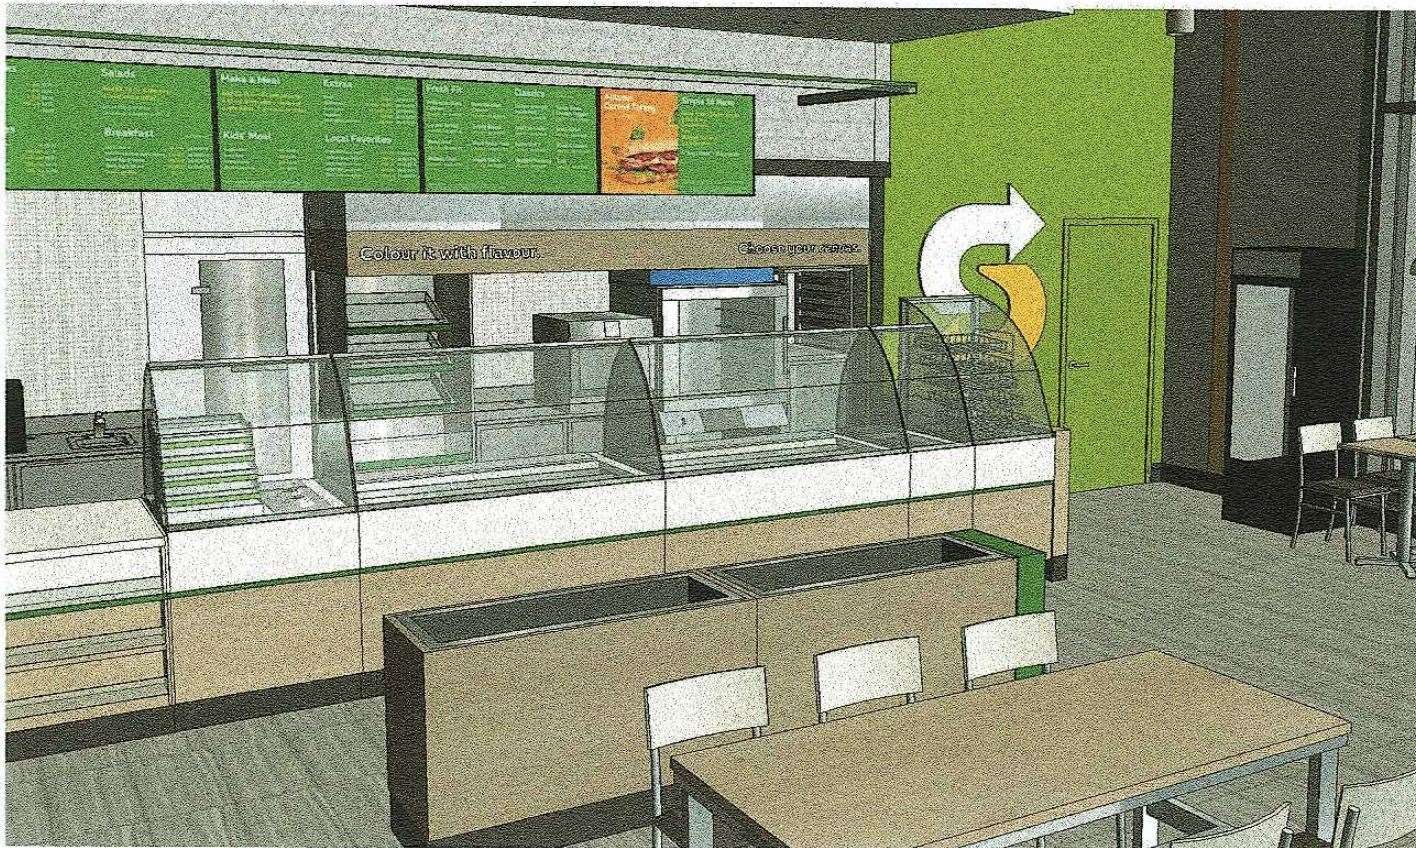 The new Subway was set to open in Charles Court, Cliftonville